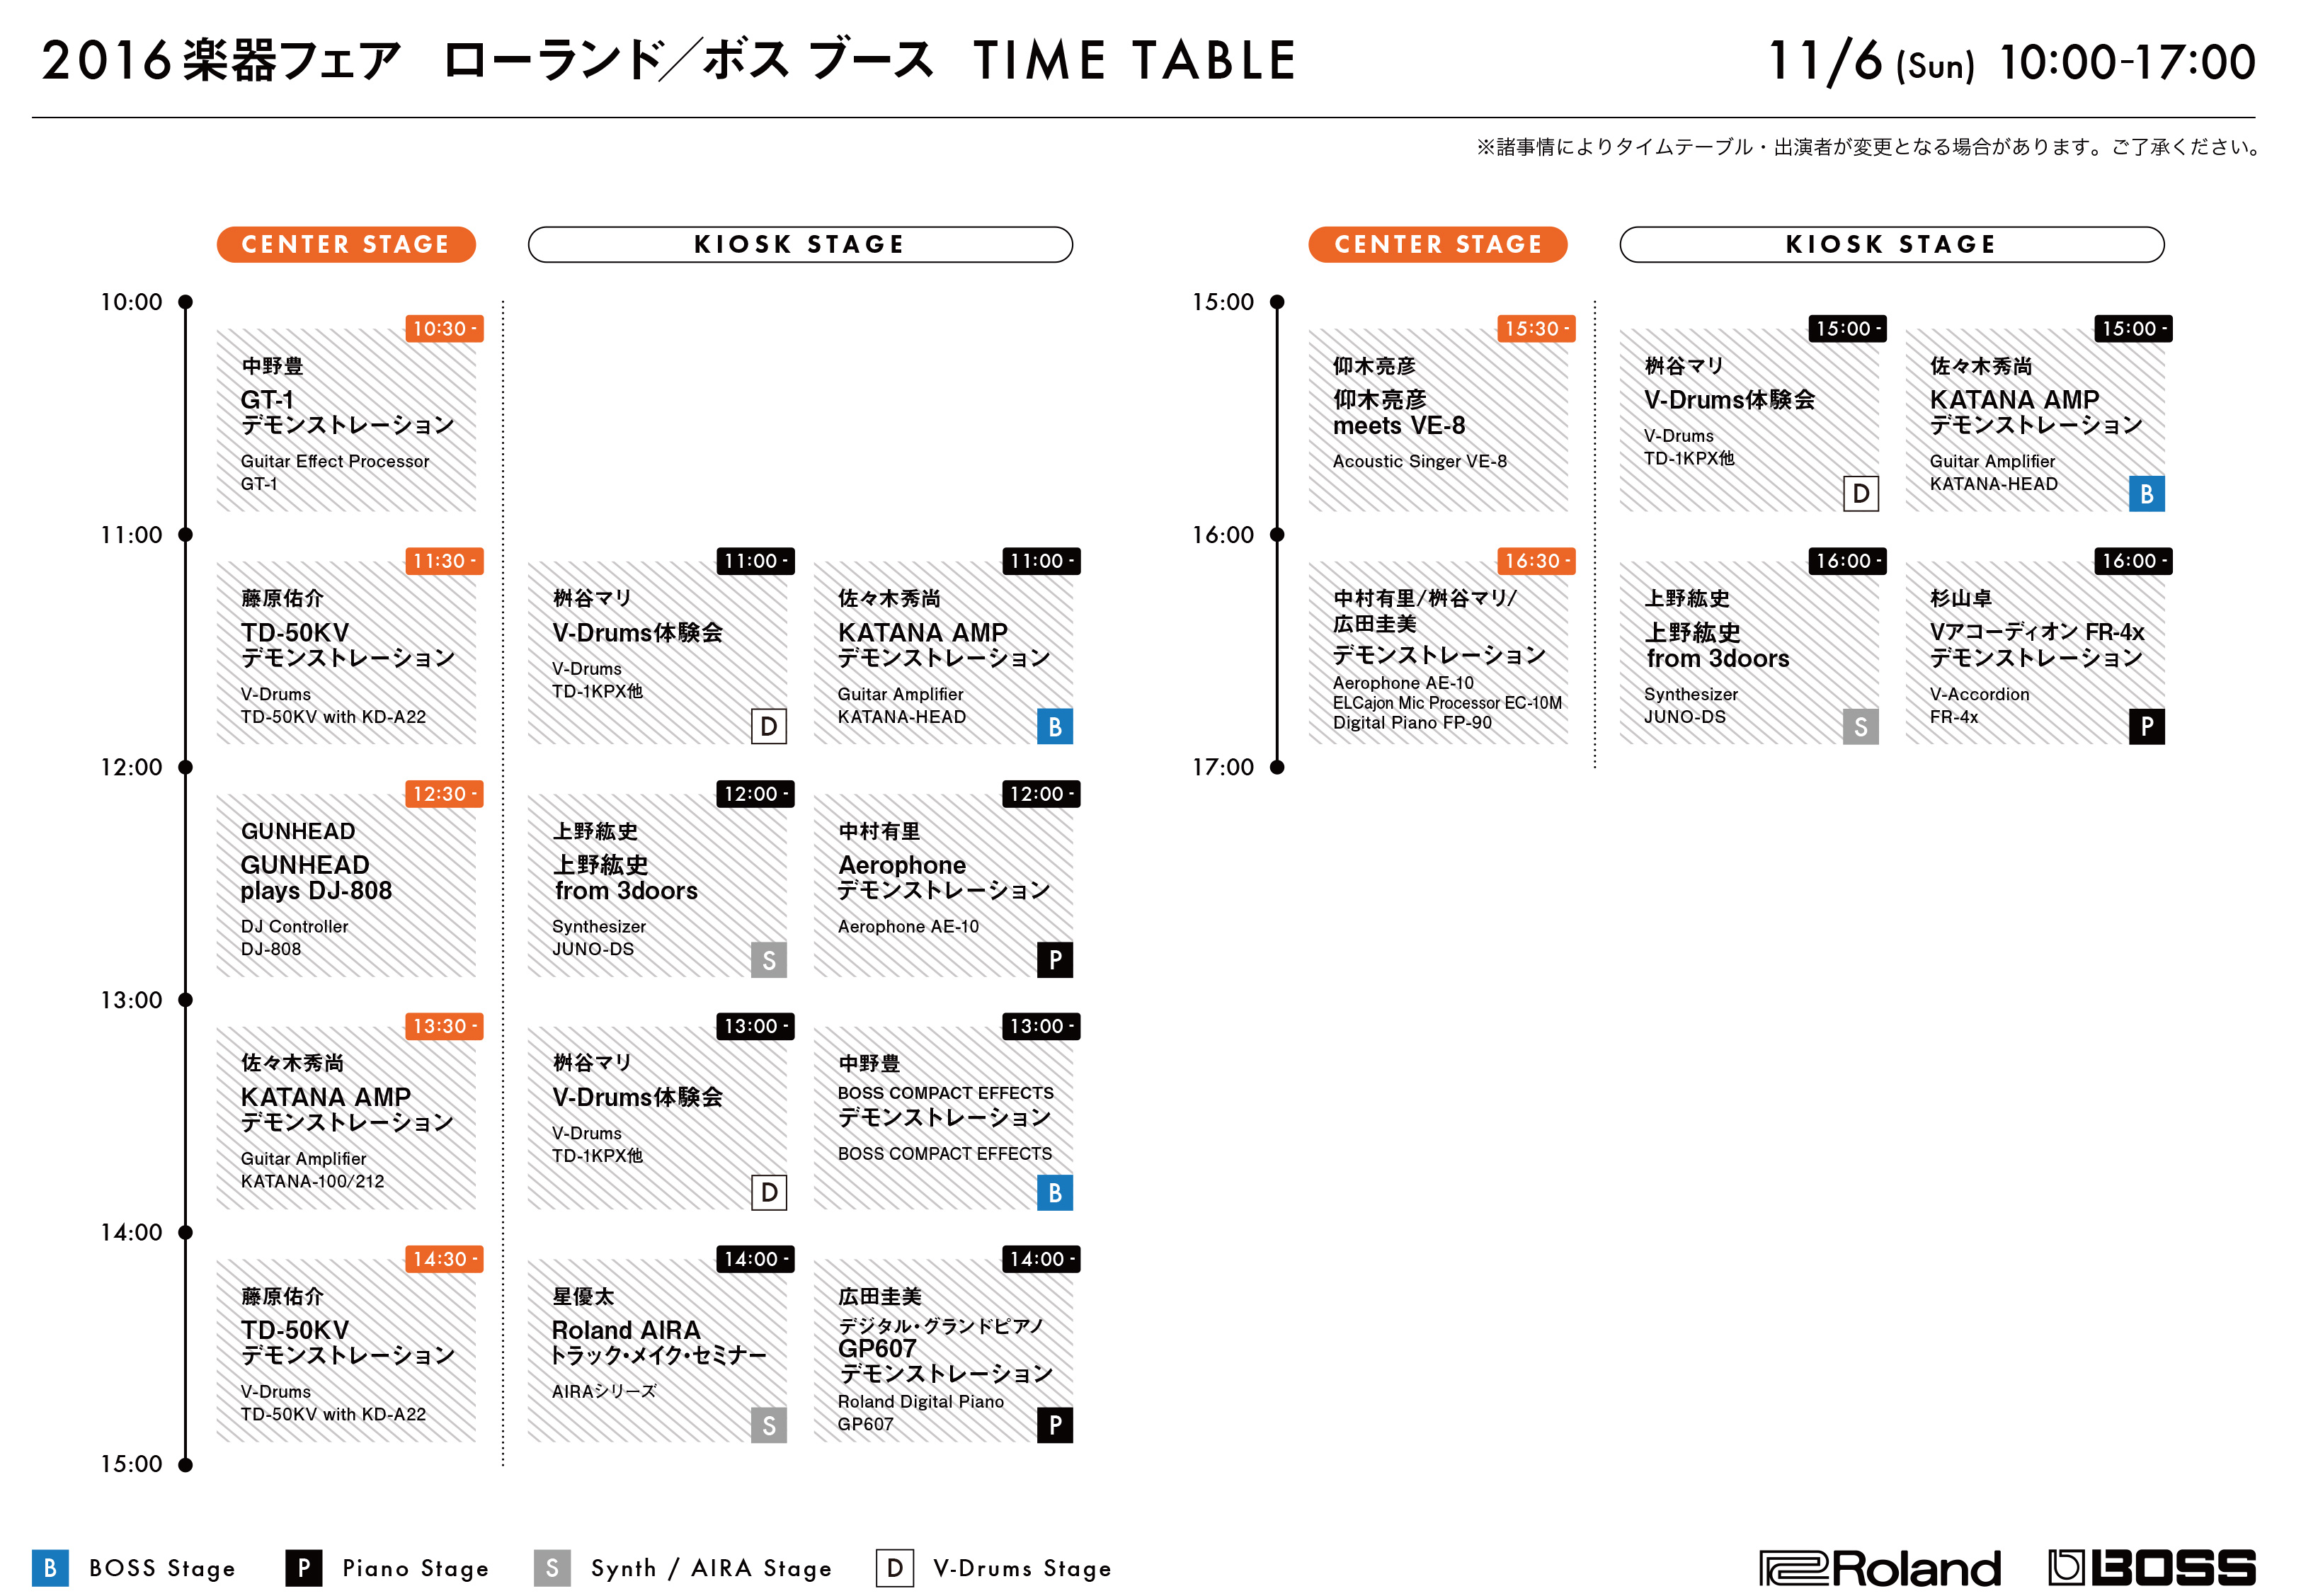 timetable_roland_boss_20161106